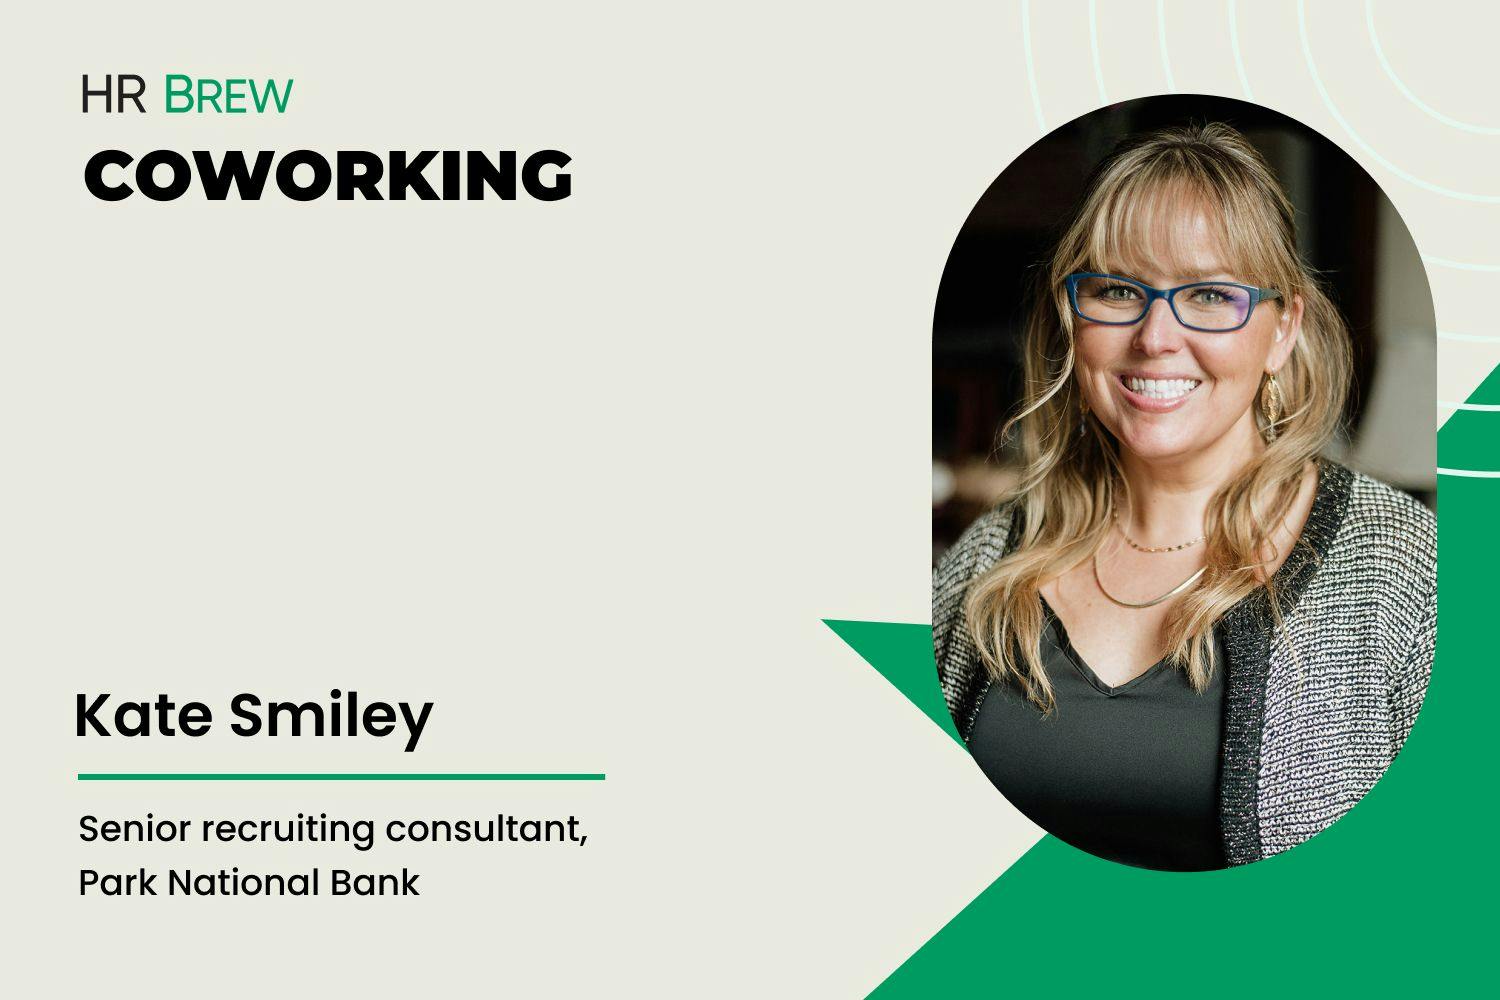 image of a woman smiling next to typeface saying HR Brew Coworking Katie Smiley senior recruiting consultant Park National Bank